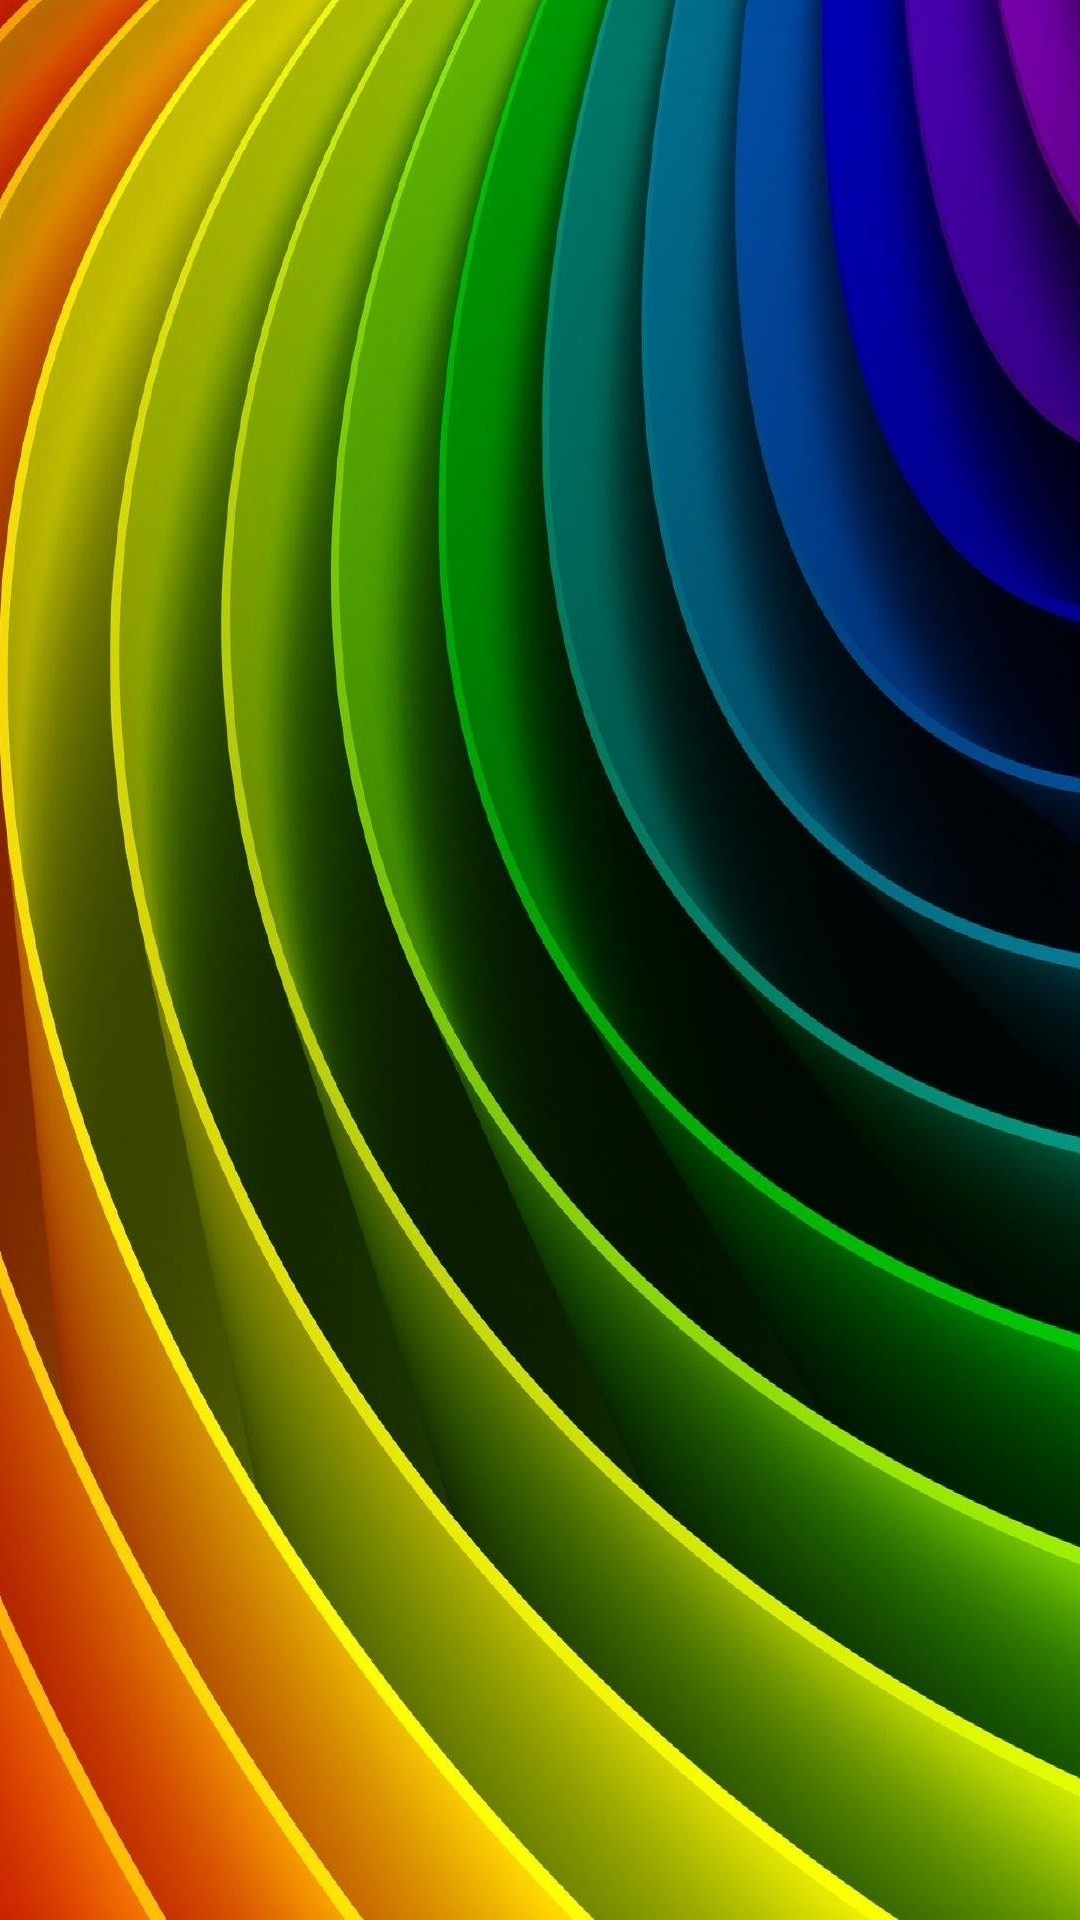 3d hd wallpapers for mobile free download,green,spiral,circle,yellow,colorfulness